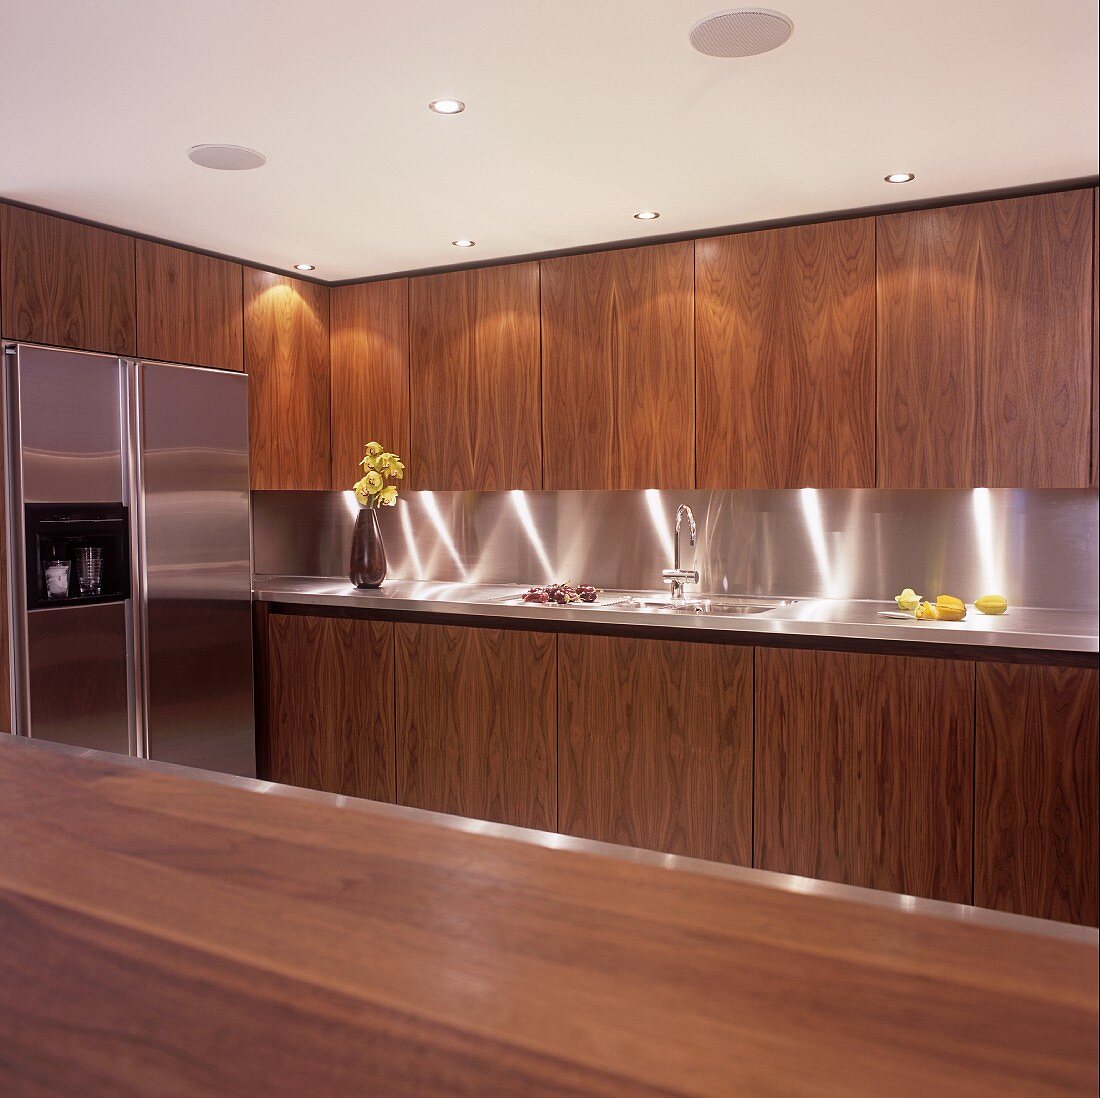 An illuminated kitchen with wooden cupboards and a stainless steel fridge